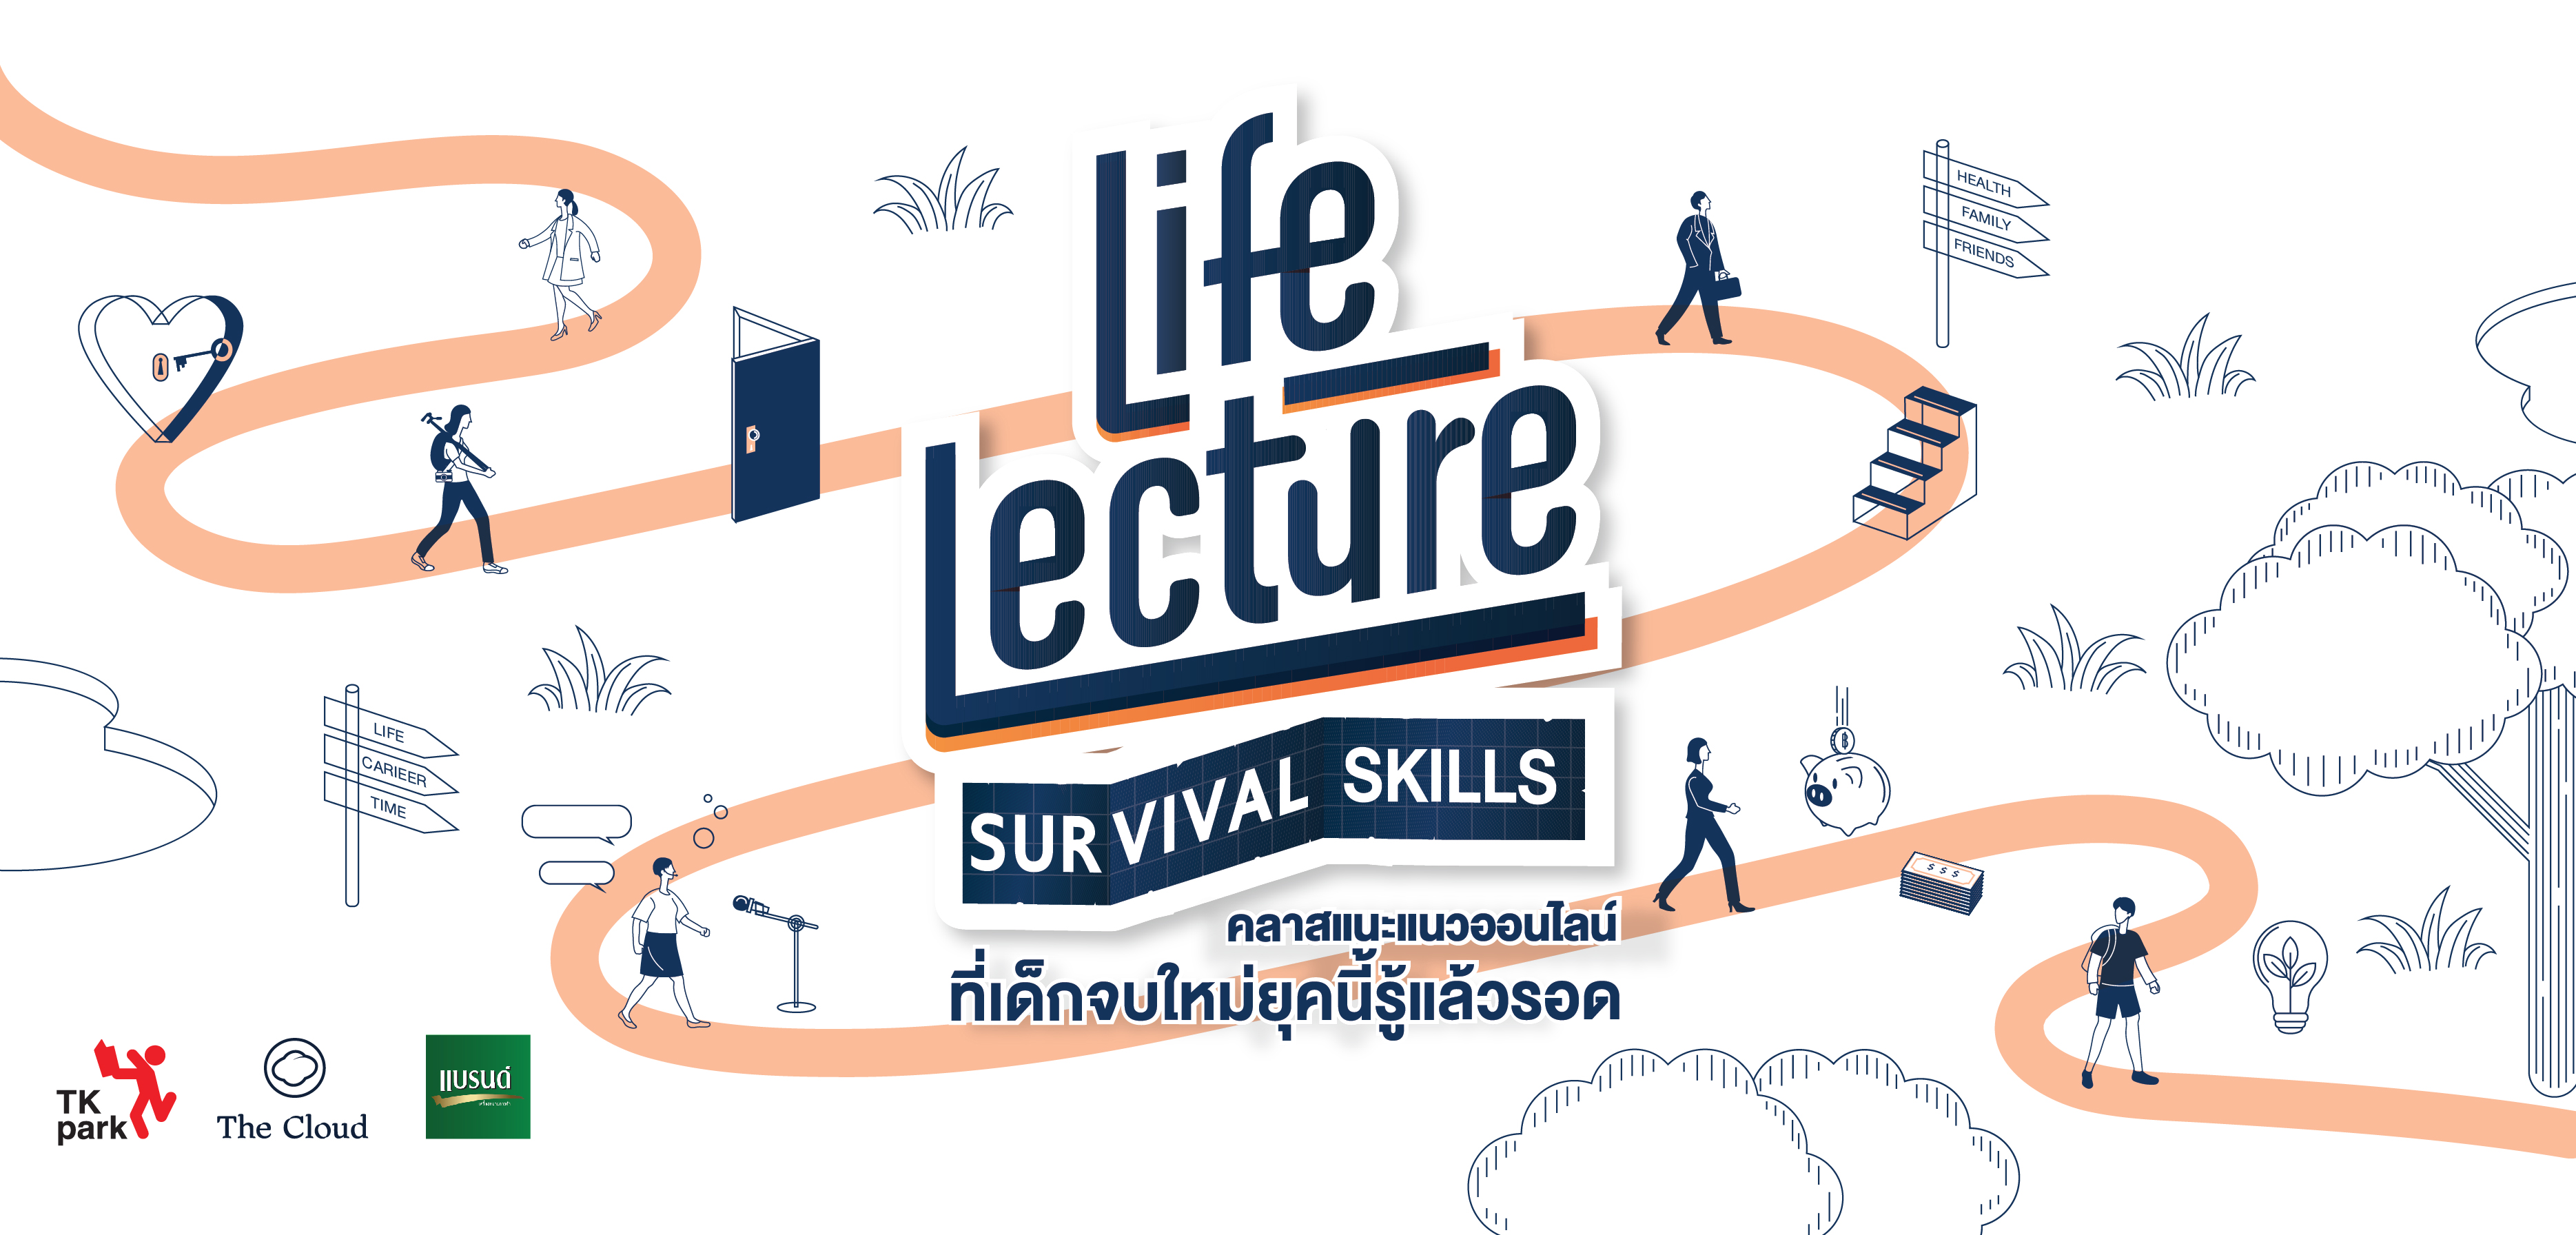 LIFE-LECTURE_897x430px_final-01.jpg